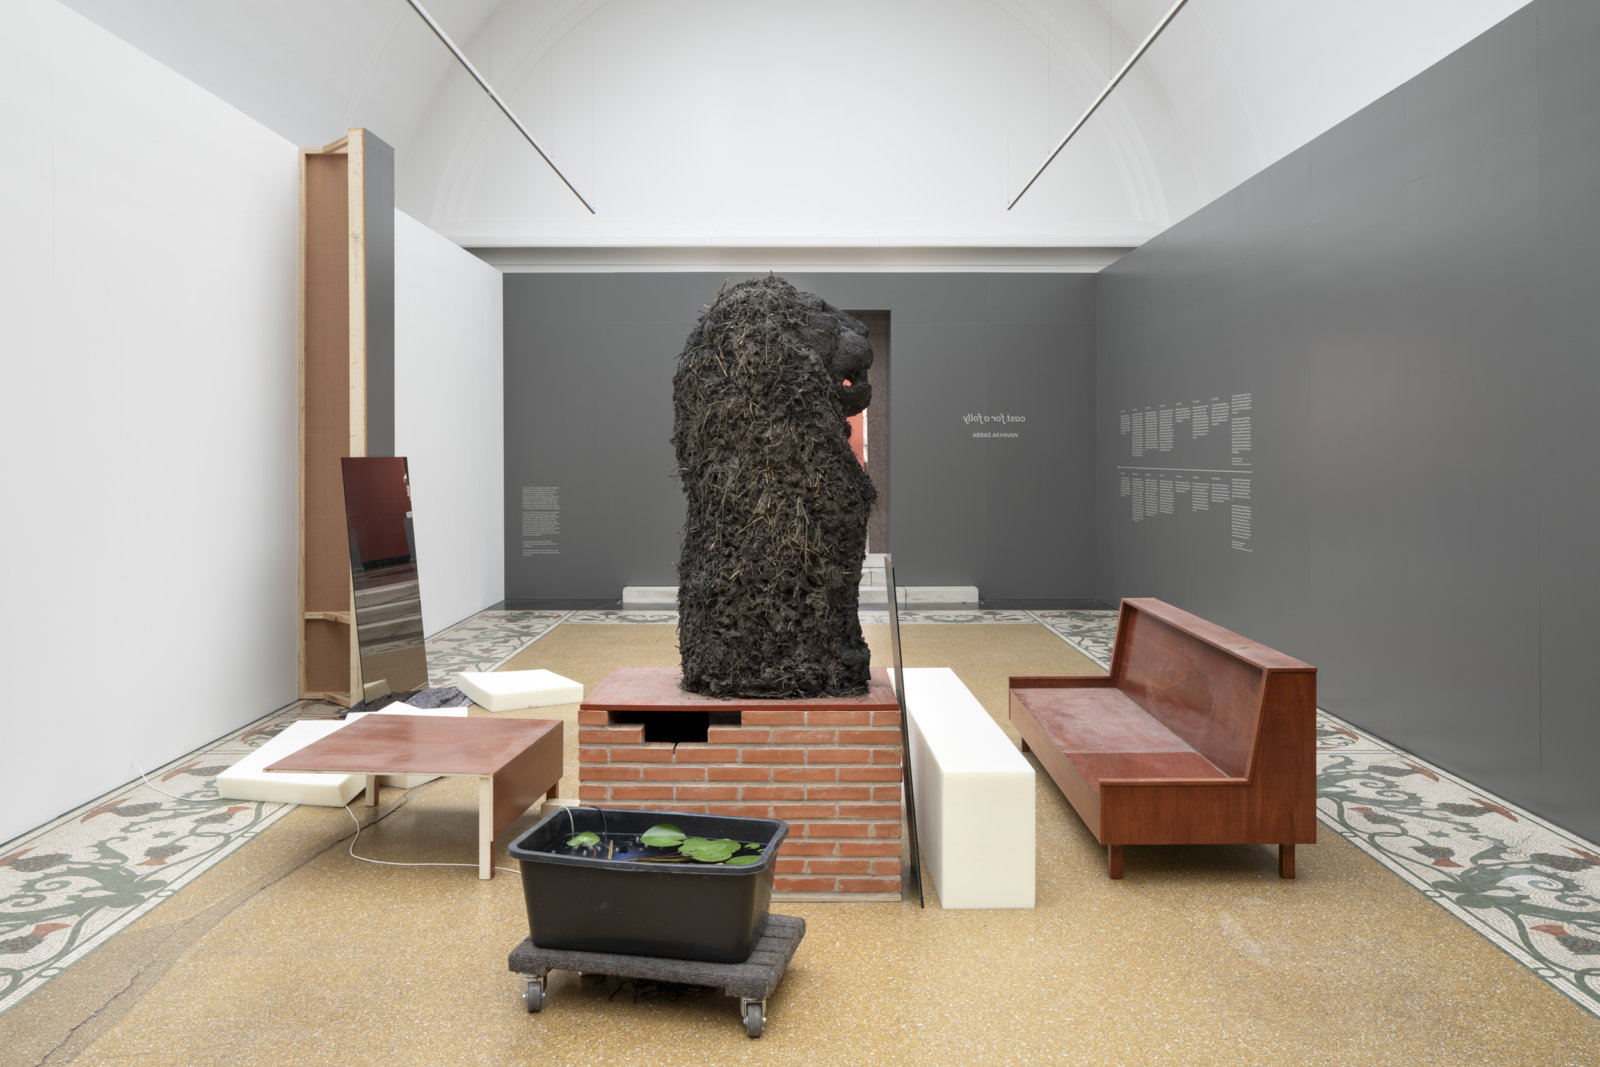 Abbas Akhavan, cast for a folly, 2019/2023, museum vitrines, benches, false doorway, digitally printed sharkstooth scrim fabric wall, green screen, mirrors, sconces, oscillating fan, chairs, plastic bucket, air conditioner, open cell foam cushions, moving blanket, clay bricks, pump, water lilies, dolly, straw, sand, plywood, mortar, dimensions variable. Installation view, curtain call, Ny Carlsberg Glyptotek, Copenhagen, Denmark, 2023